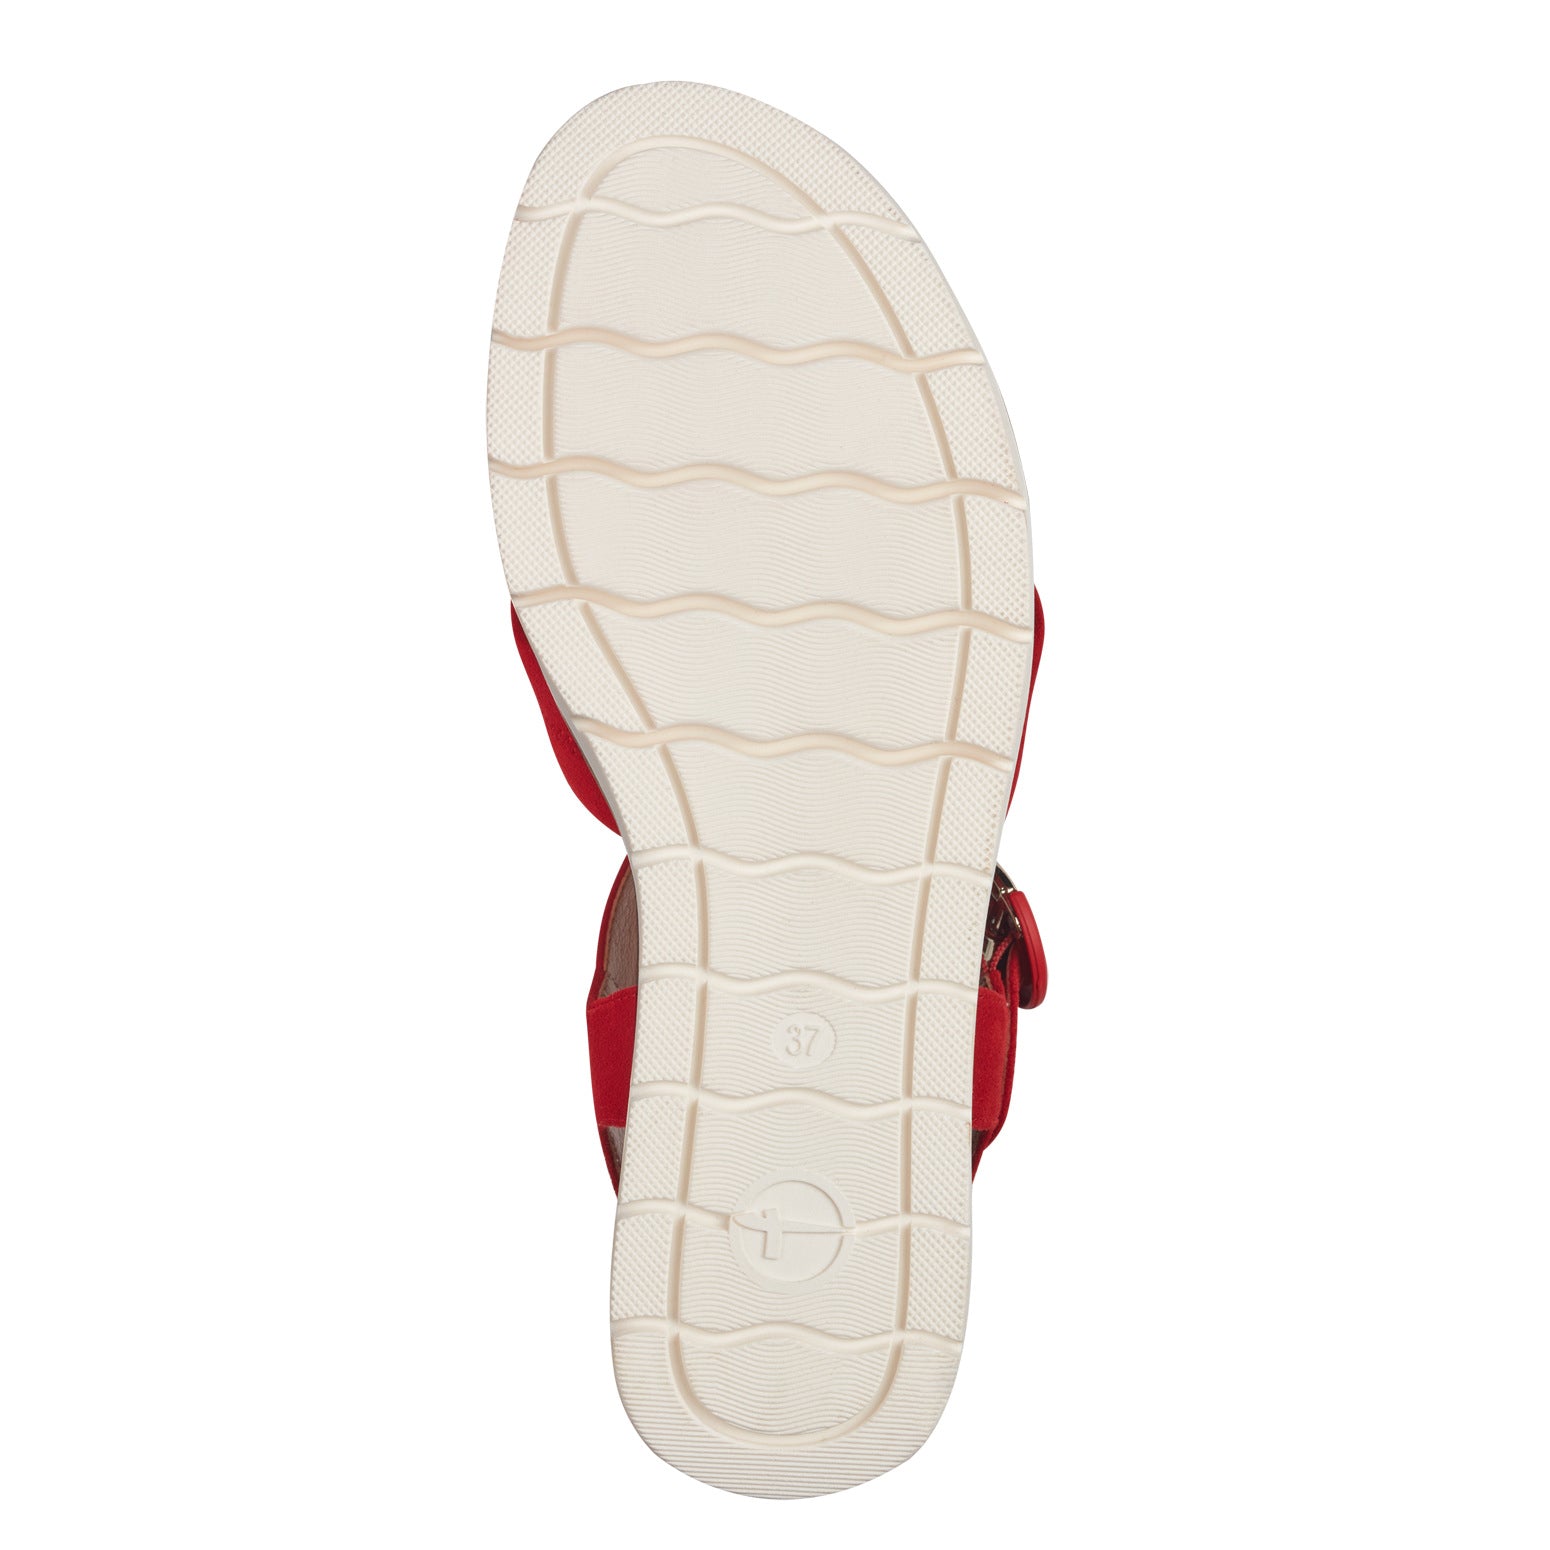 Tamaris Strappy Leather Sandal Red